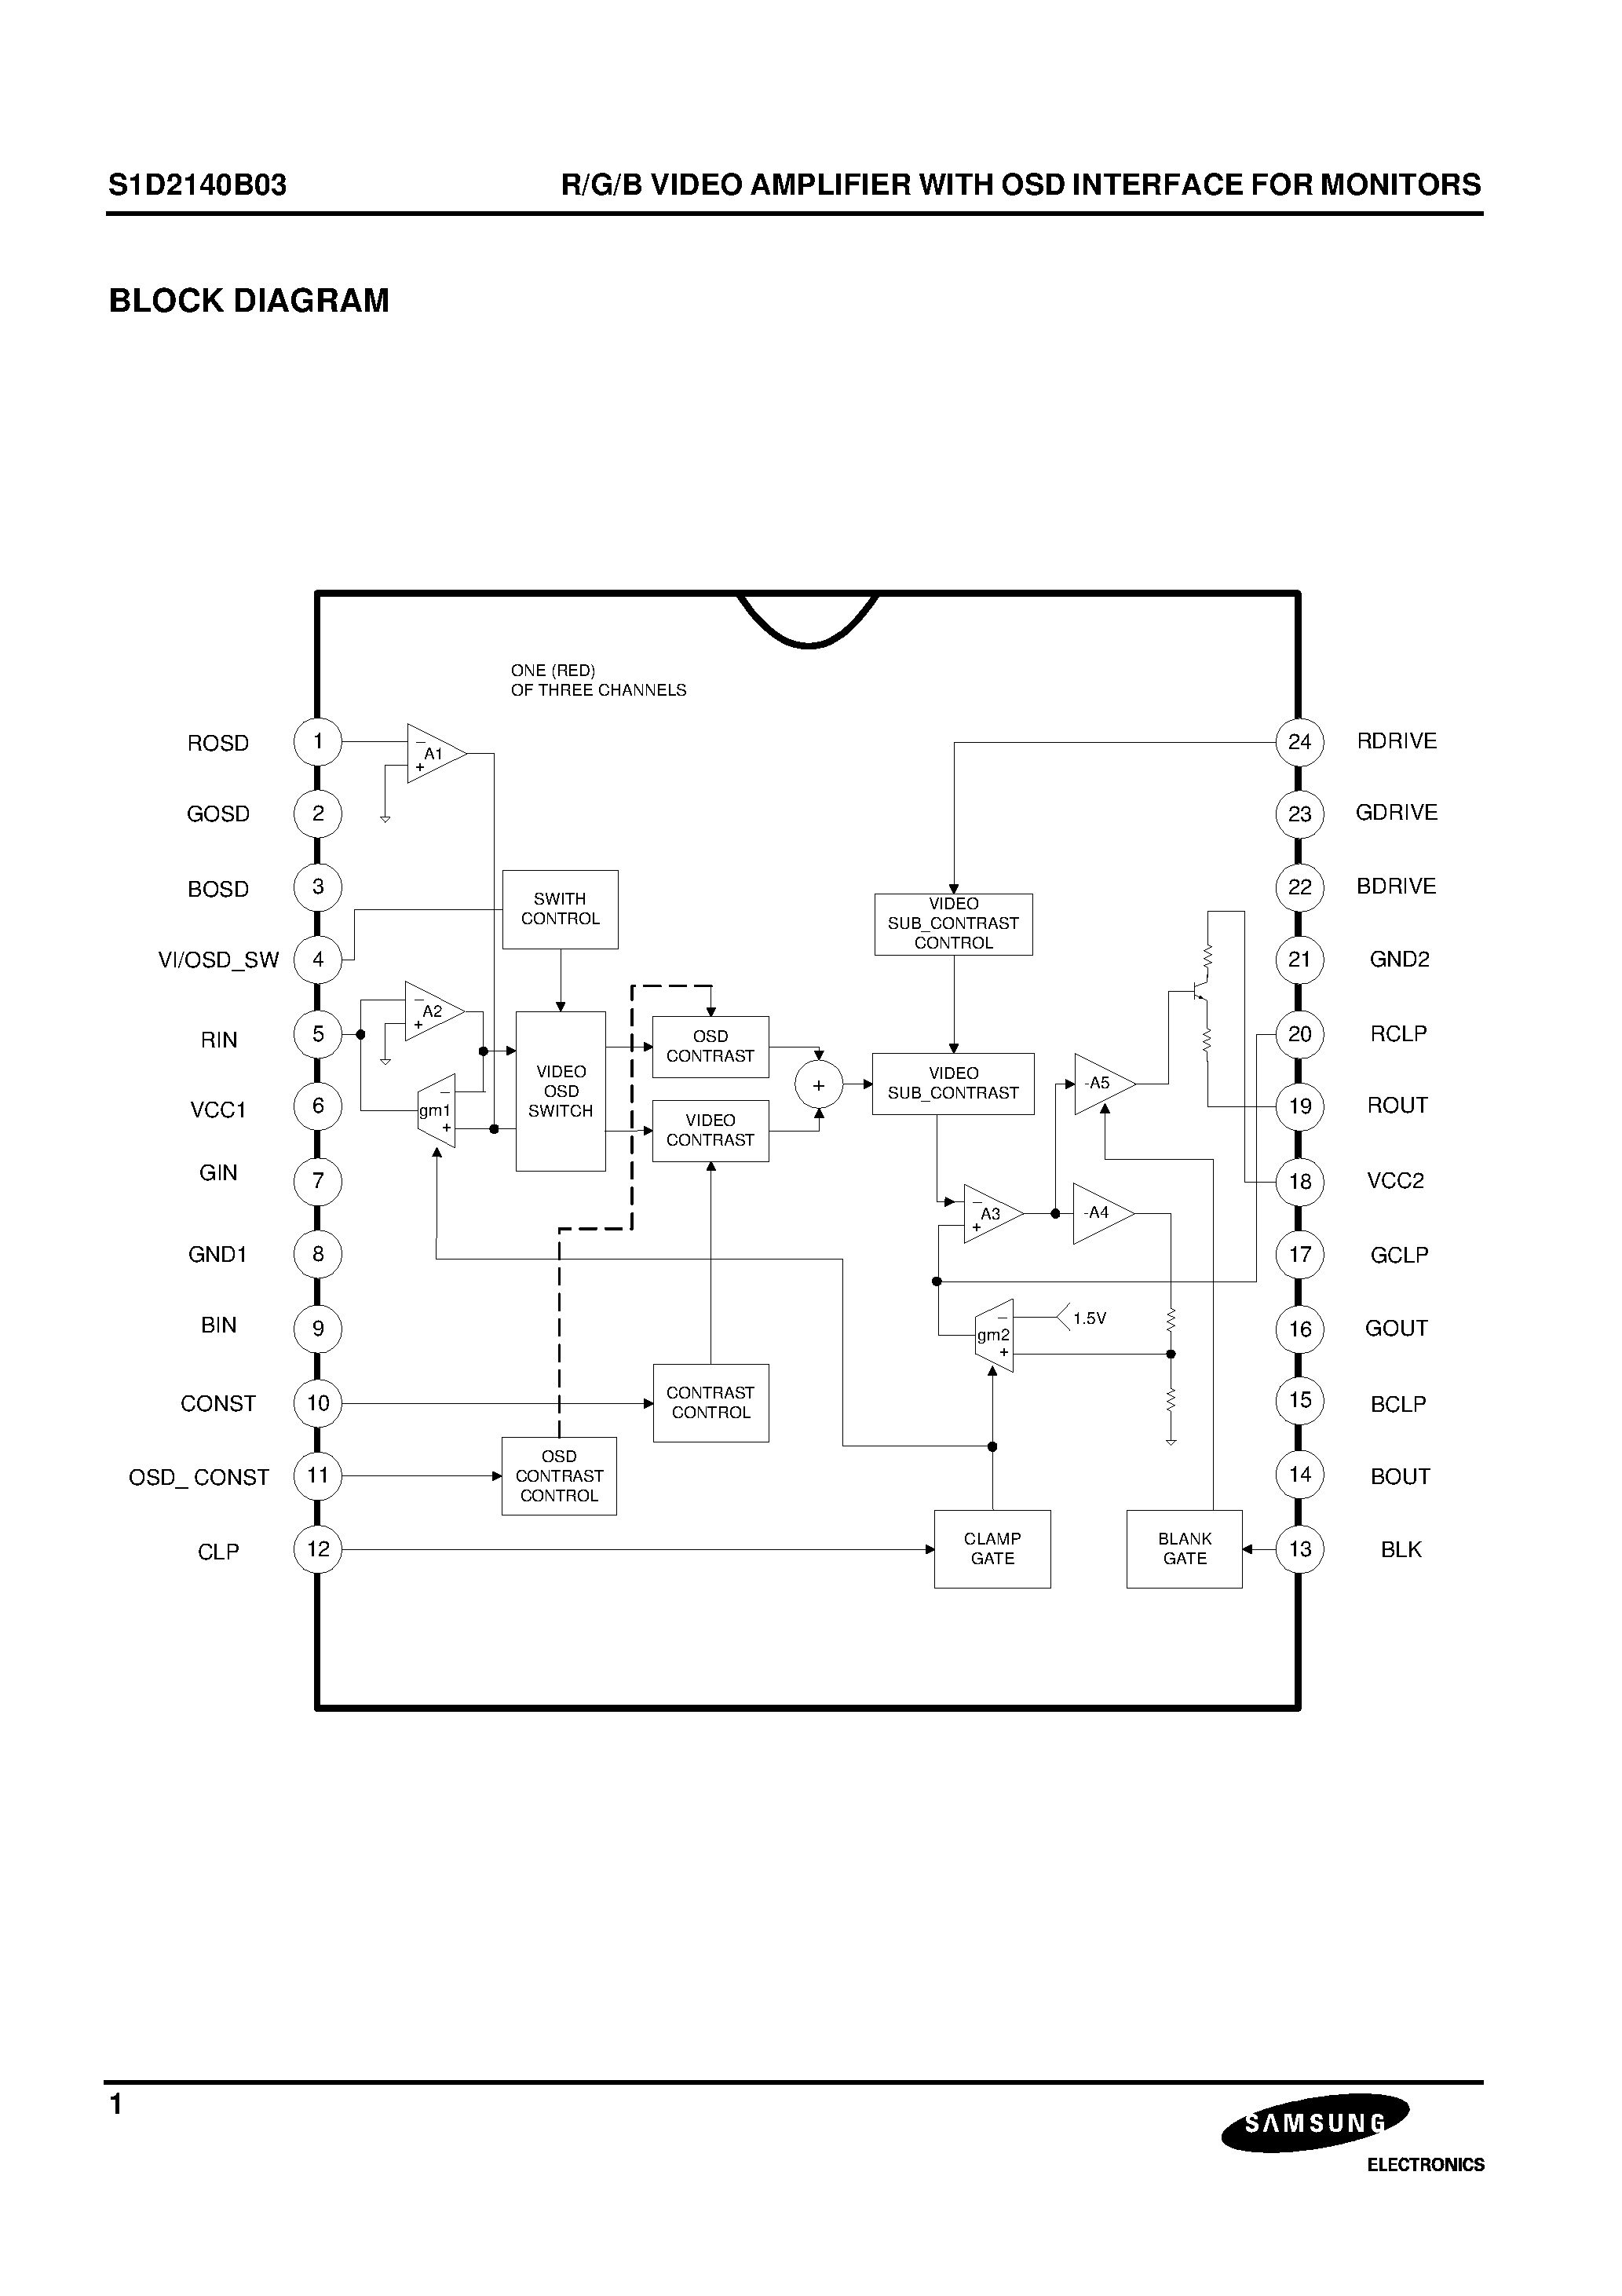 Datasheet S1D2140B03 - R/G/B VIDEO AMPLIFIER WITH OSD INTERFACE FOR MONITORS page 2